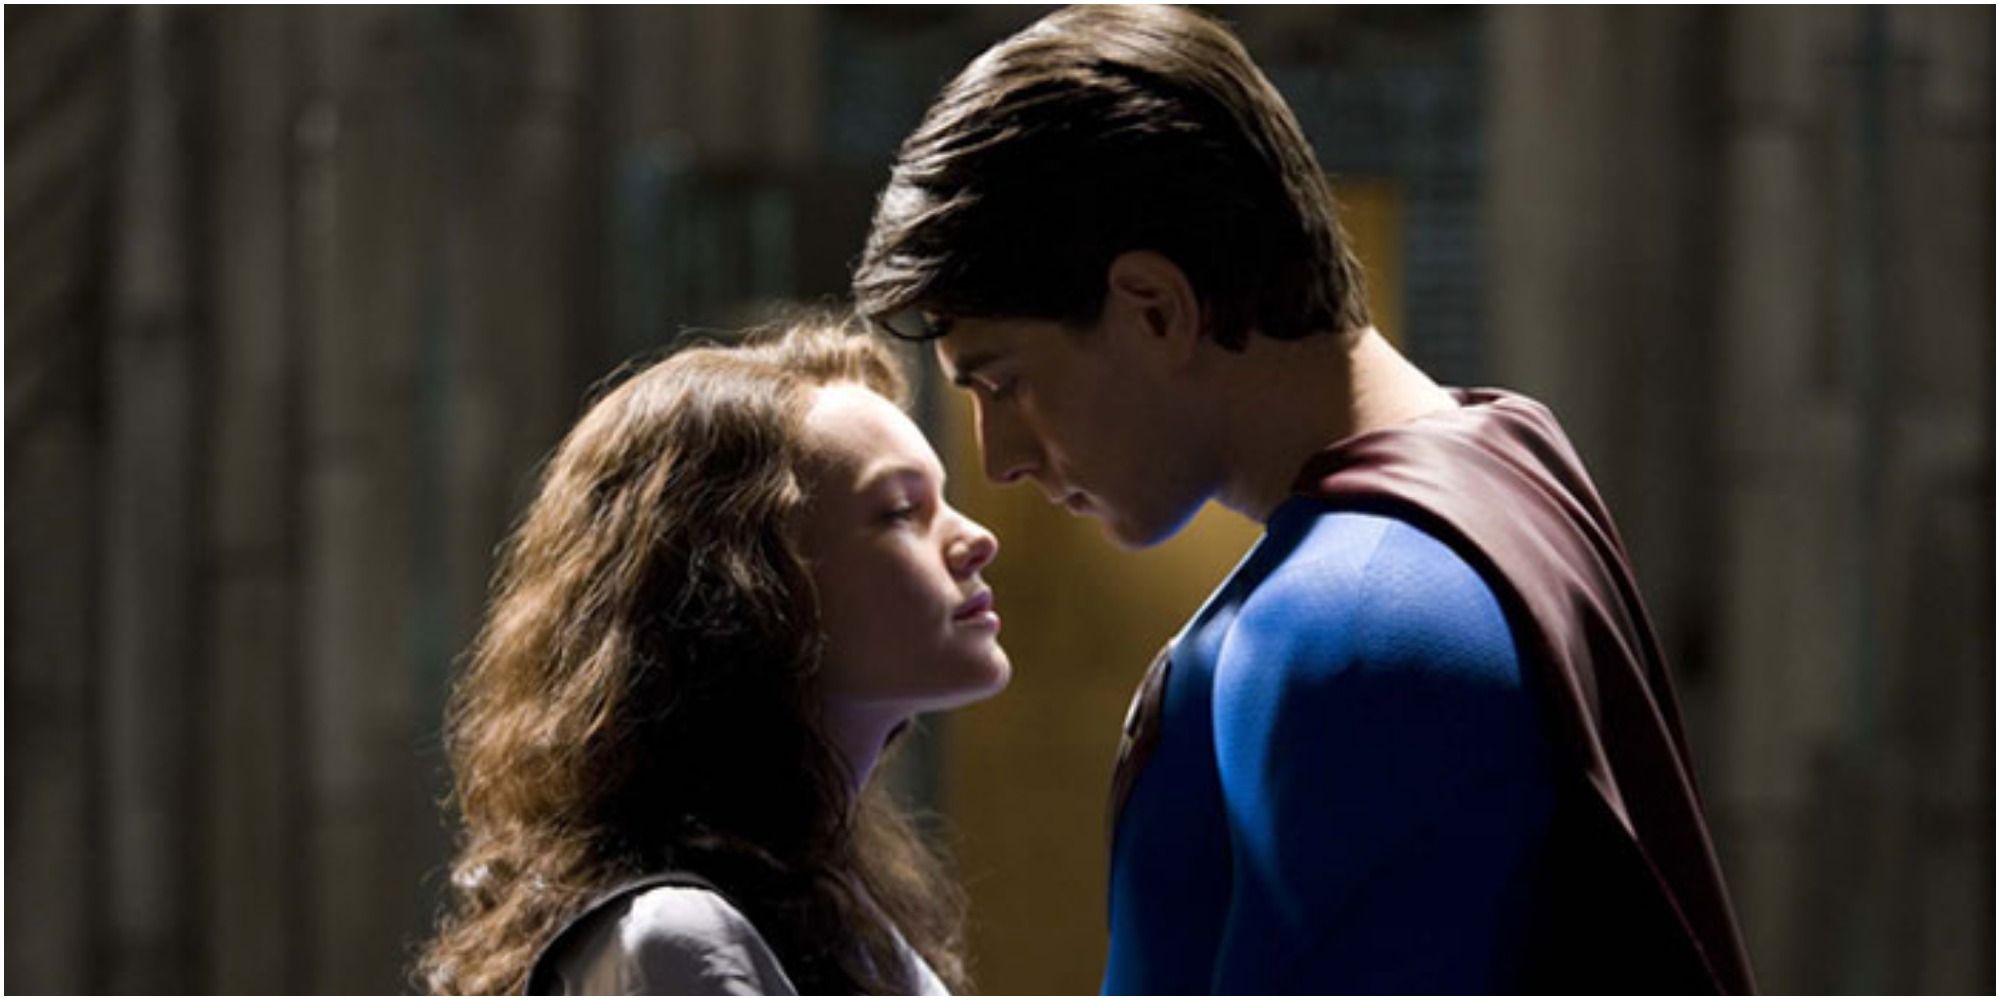 Brandon Routh as Superman and Kate Bosworth Lois in Superman Returns